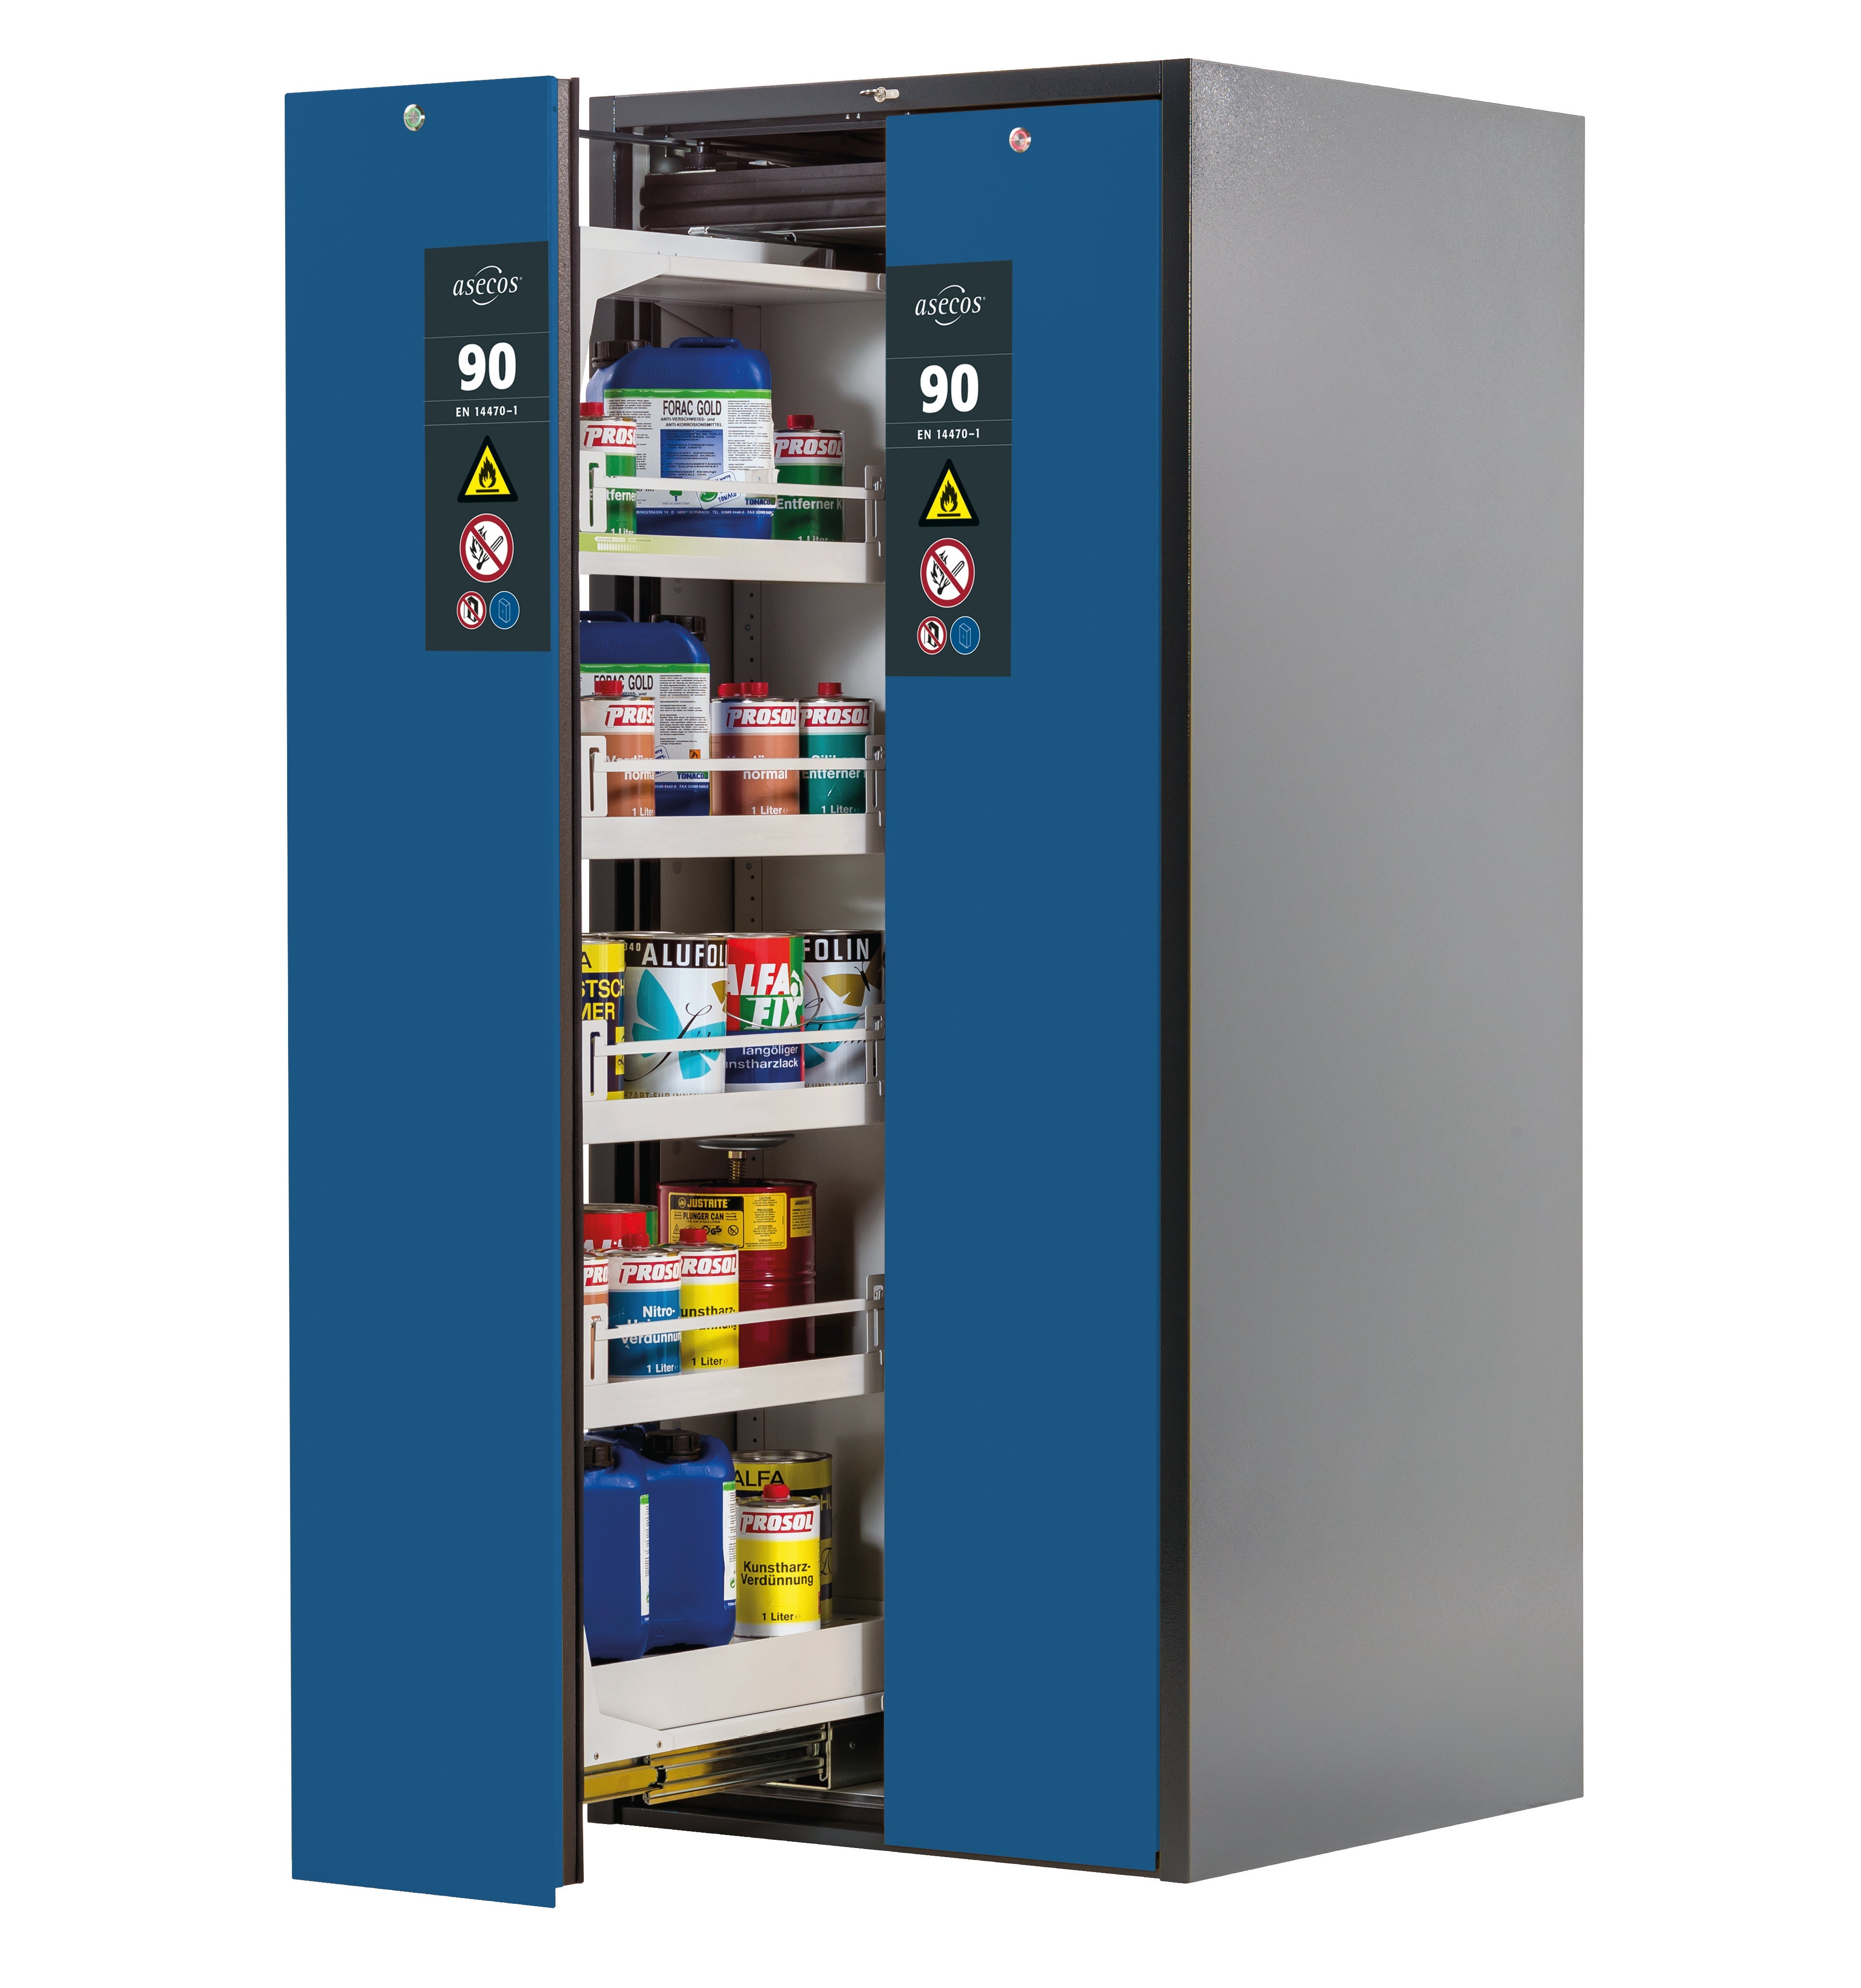 Type 90 safety cabinet V-MOVE-90 model V90.196.081.VDAC:0013 in gentian blue RAL 5010 with 4x standard tray base (sheet steel)